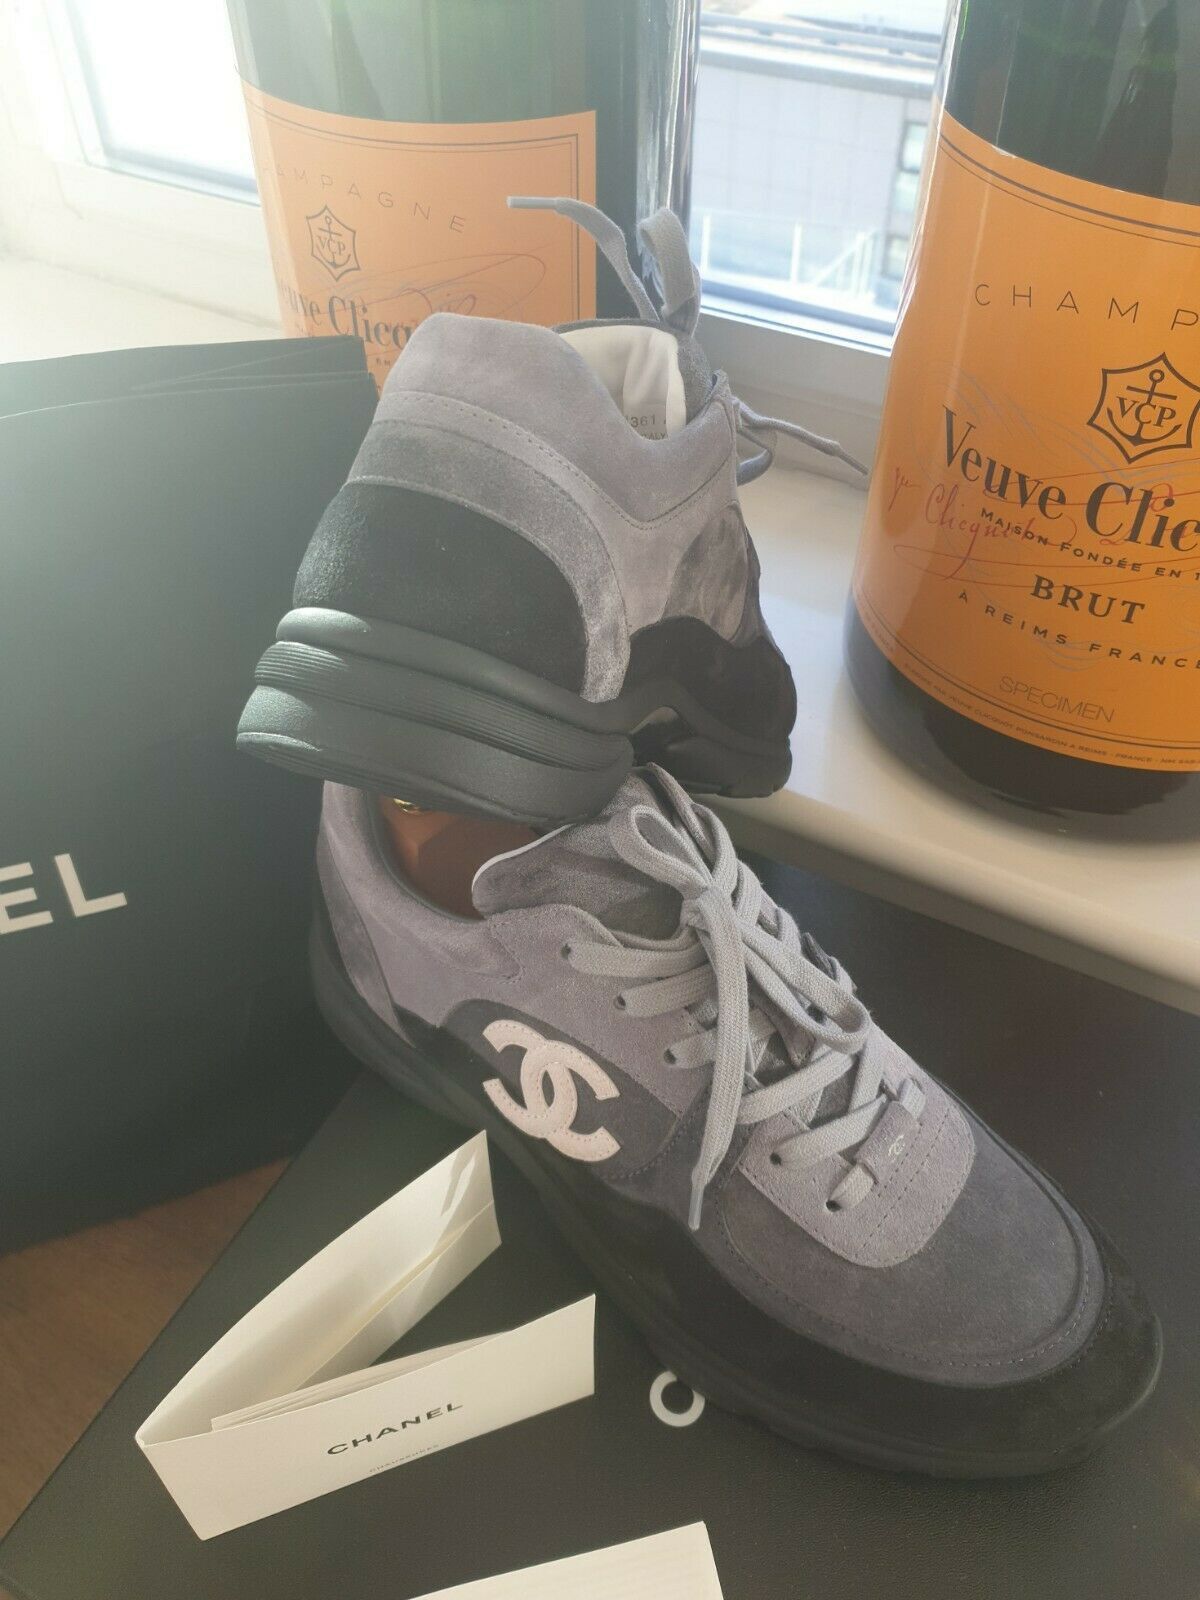 Chanel NEW Chanel CC Race Runner Sneakers 43 Shoes Grey Suede Size US 10 / EU 43 - 5 Thumbnail